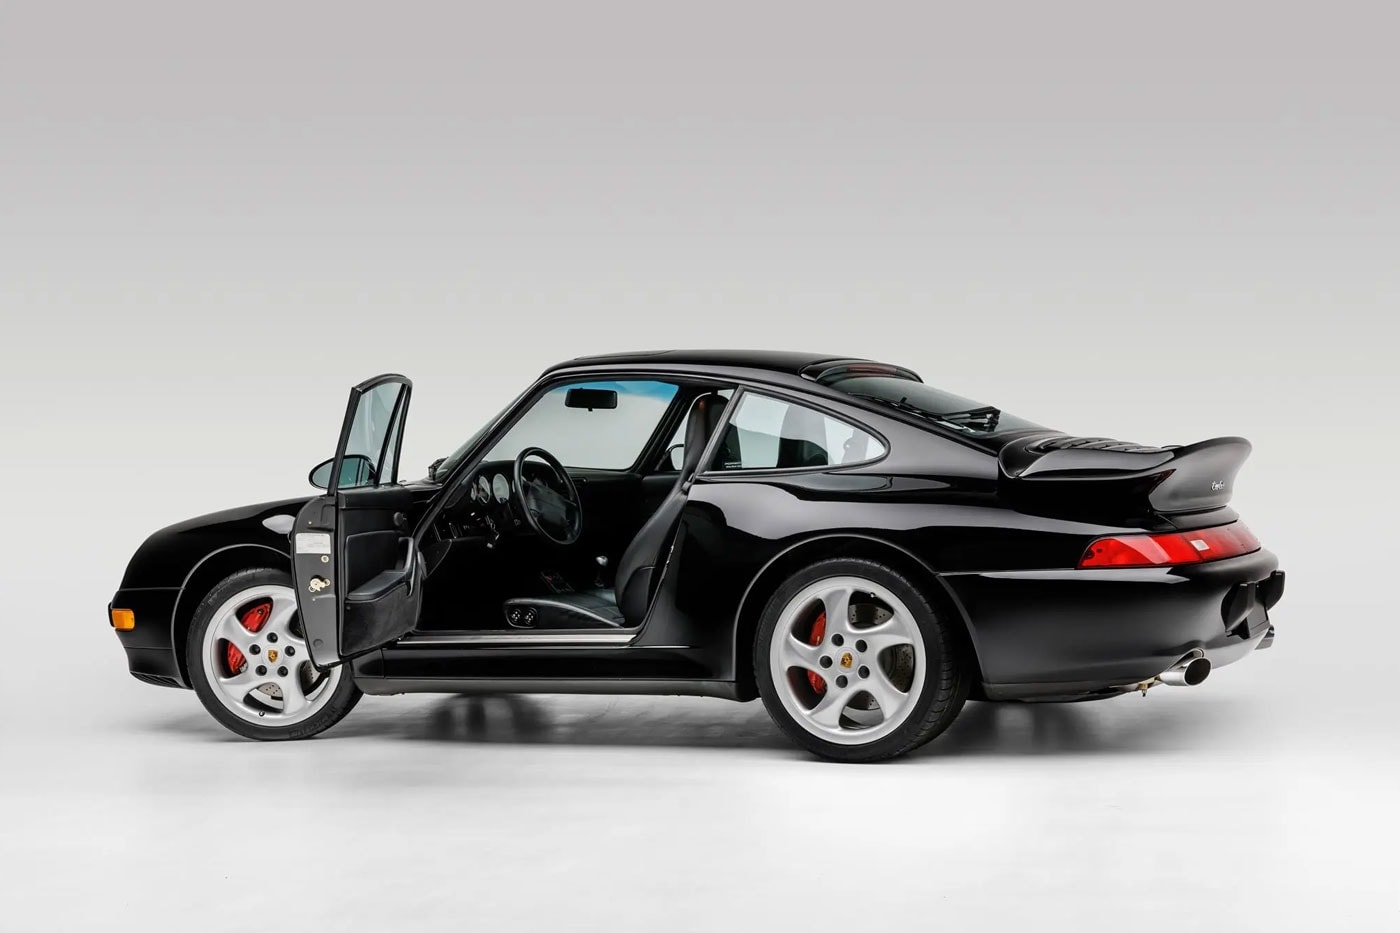 Denzel Washington 1997 Porsche 911 Turbo auction Info xenon headlights tool kit clean title report wodebpdy power sunroof black pleated leather Release info 